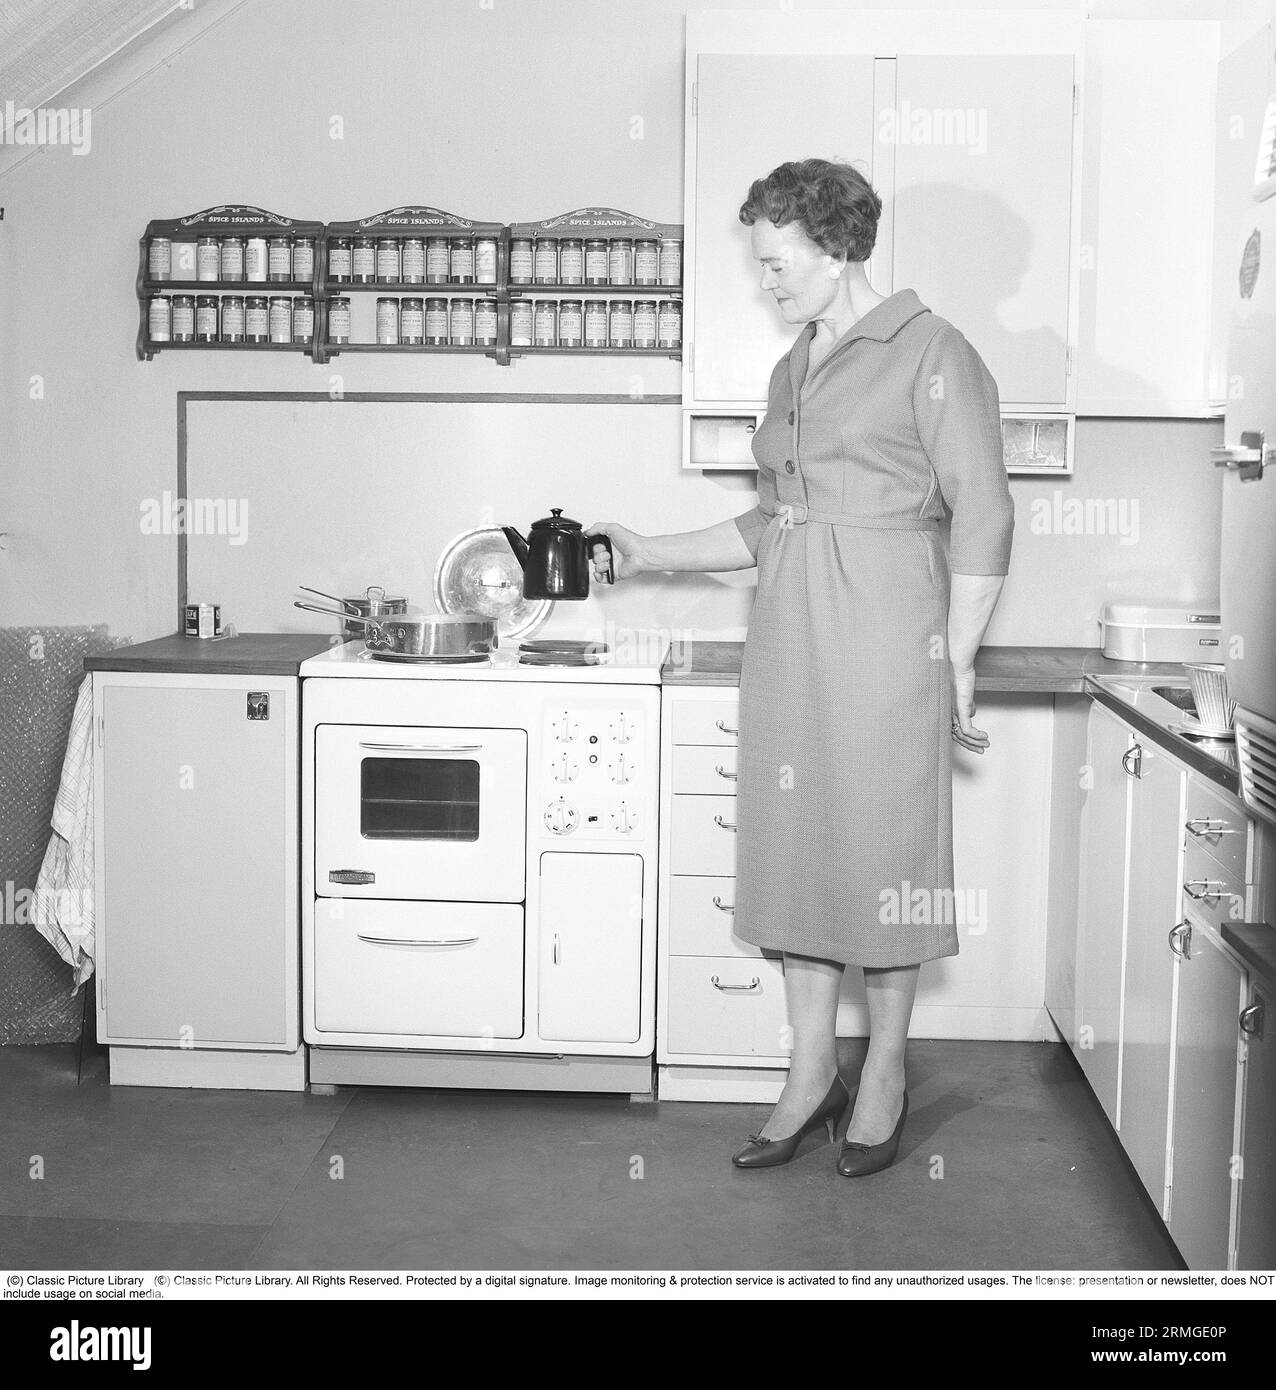 In the 1950s. A woman in a typical 1950s kitchen with wooden cabinets and a set of spices on shelfes above the cooker. She is holding a coffee pot in the typical 50s enamelled look. Sweden 1959. Kristoffersson ref CL8-9 Stock Photo